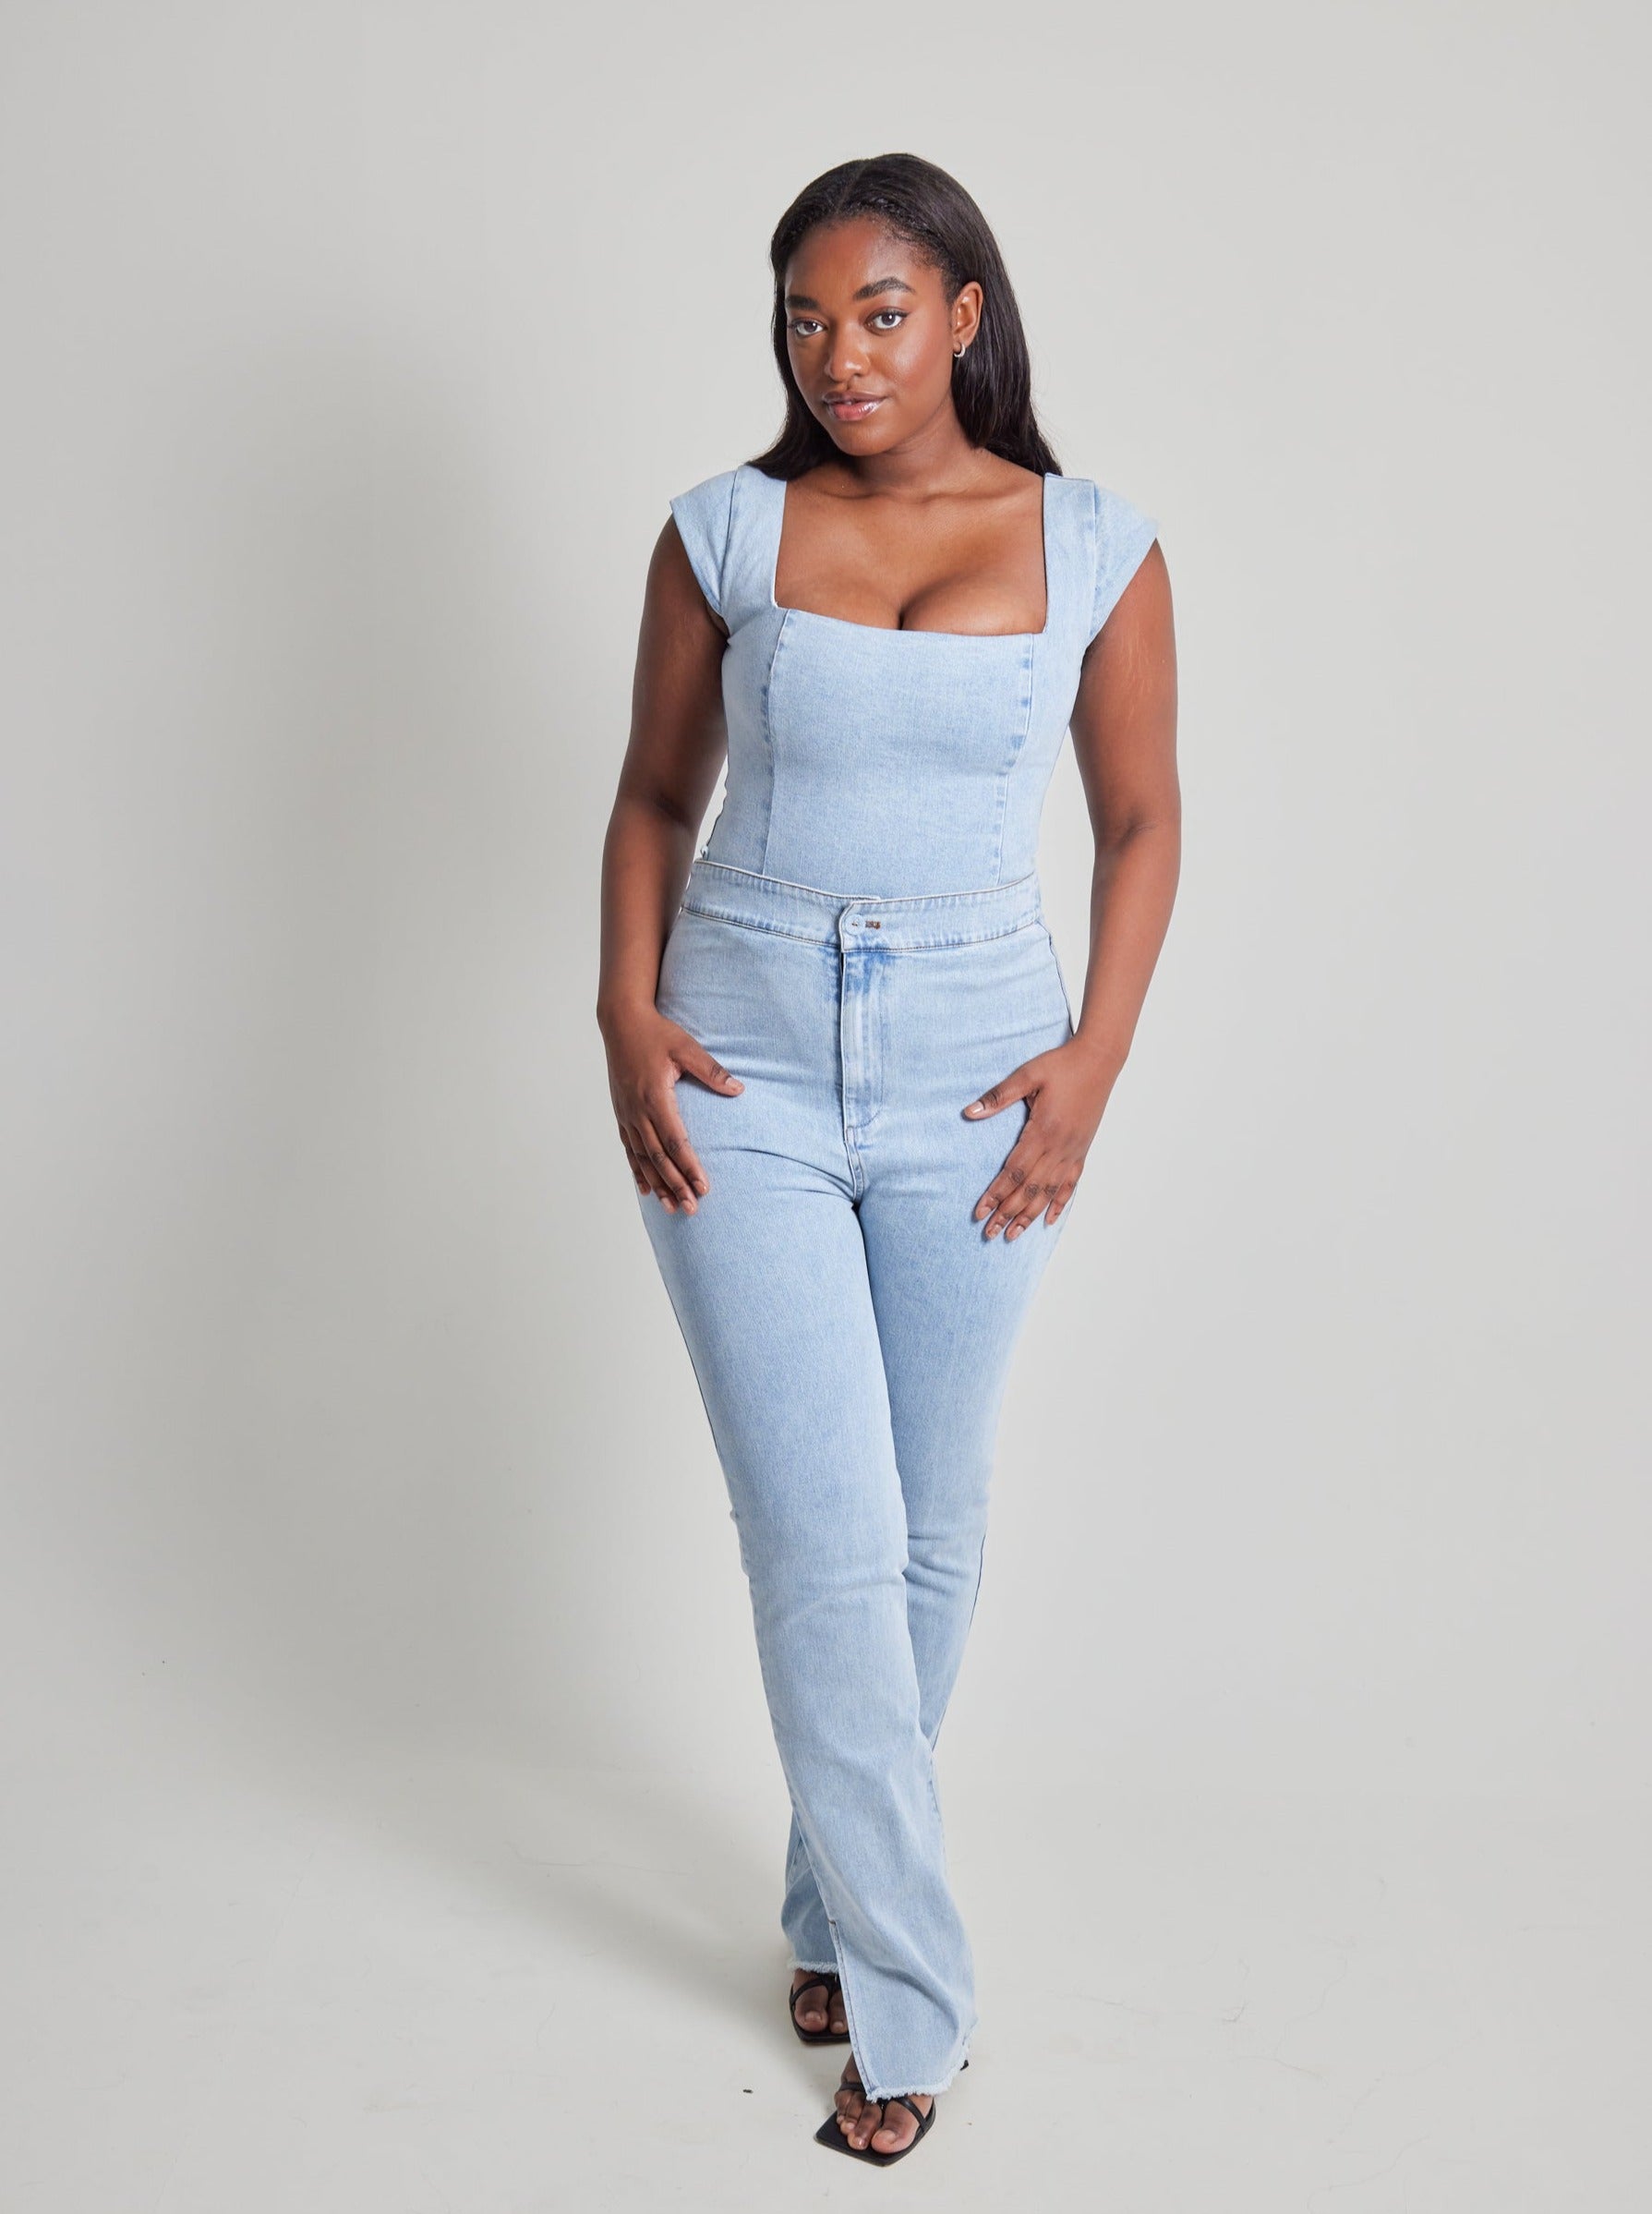 The Ultimate Muse Denim Jeans – Odd Muse